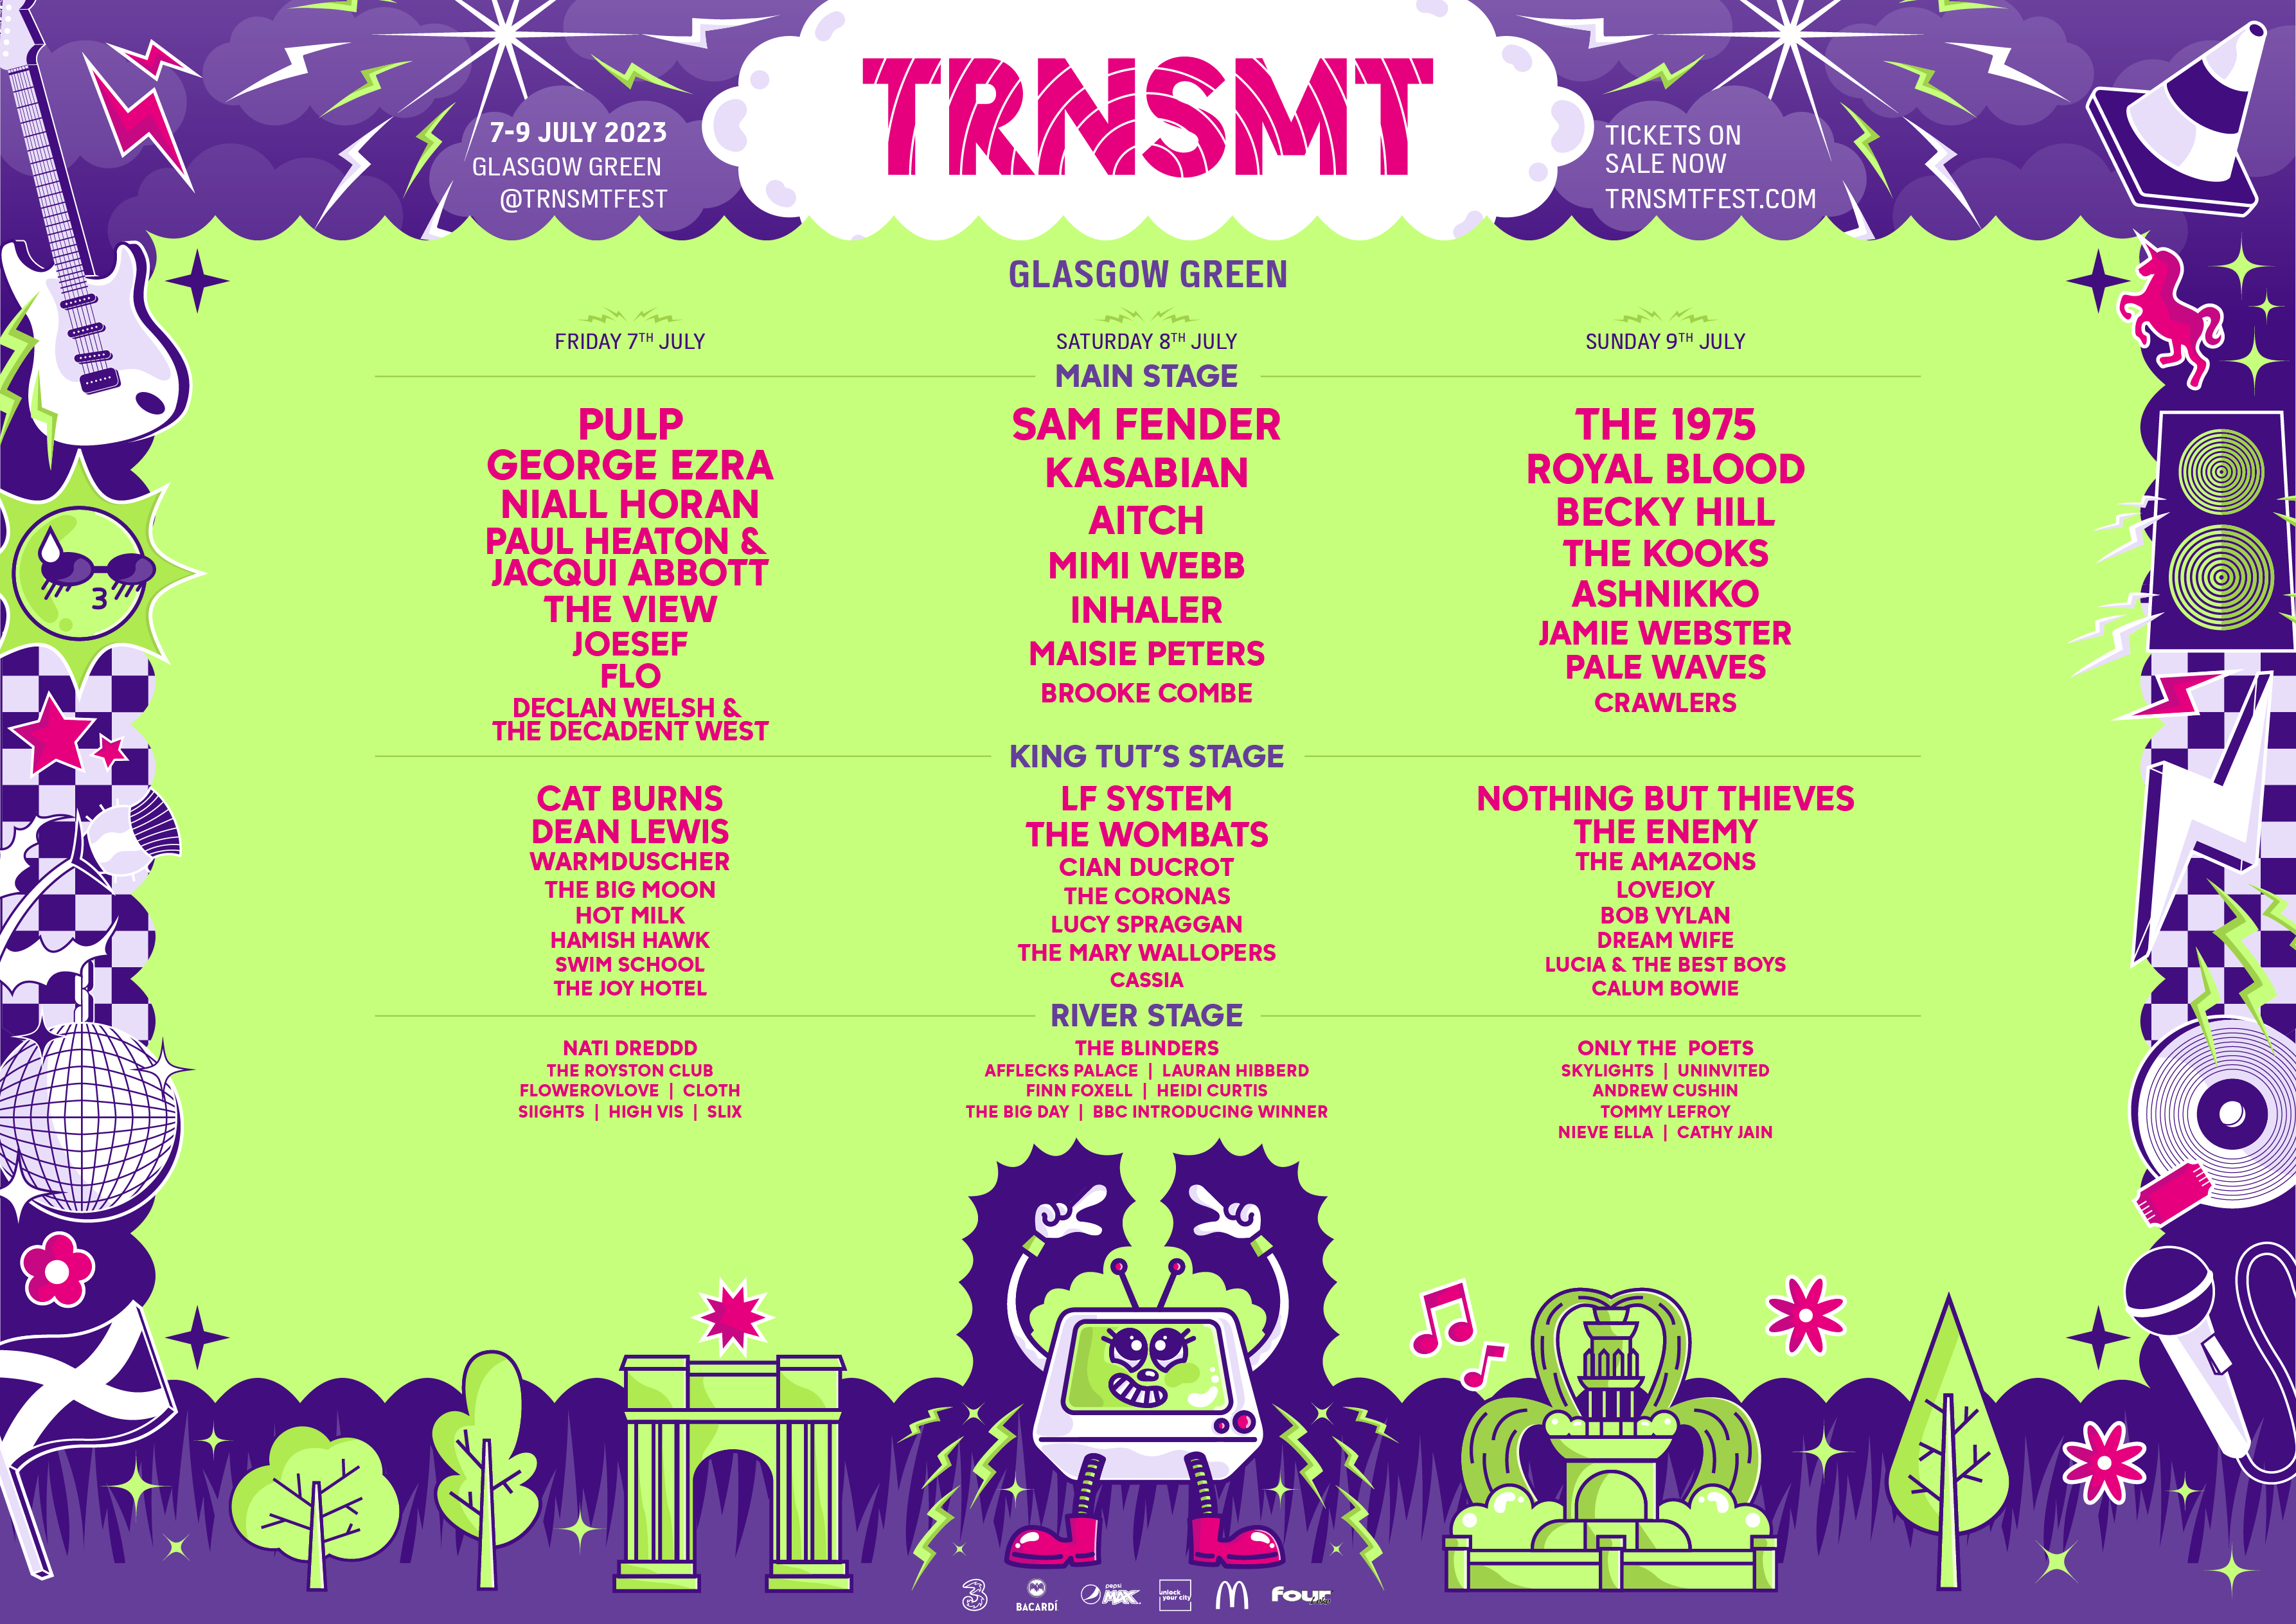 50 acts added to TRNSMT Festival 2023 Lineup RESOUND Online